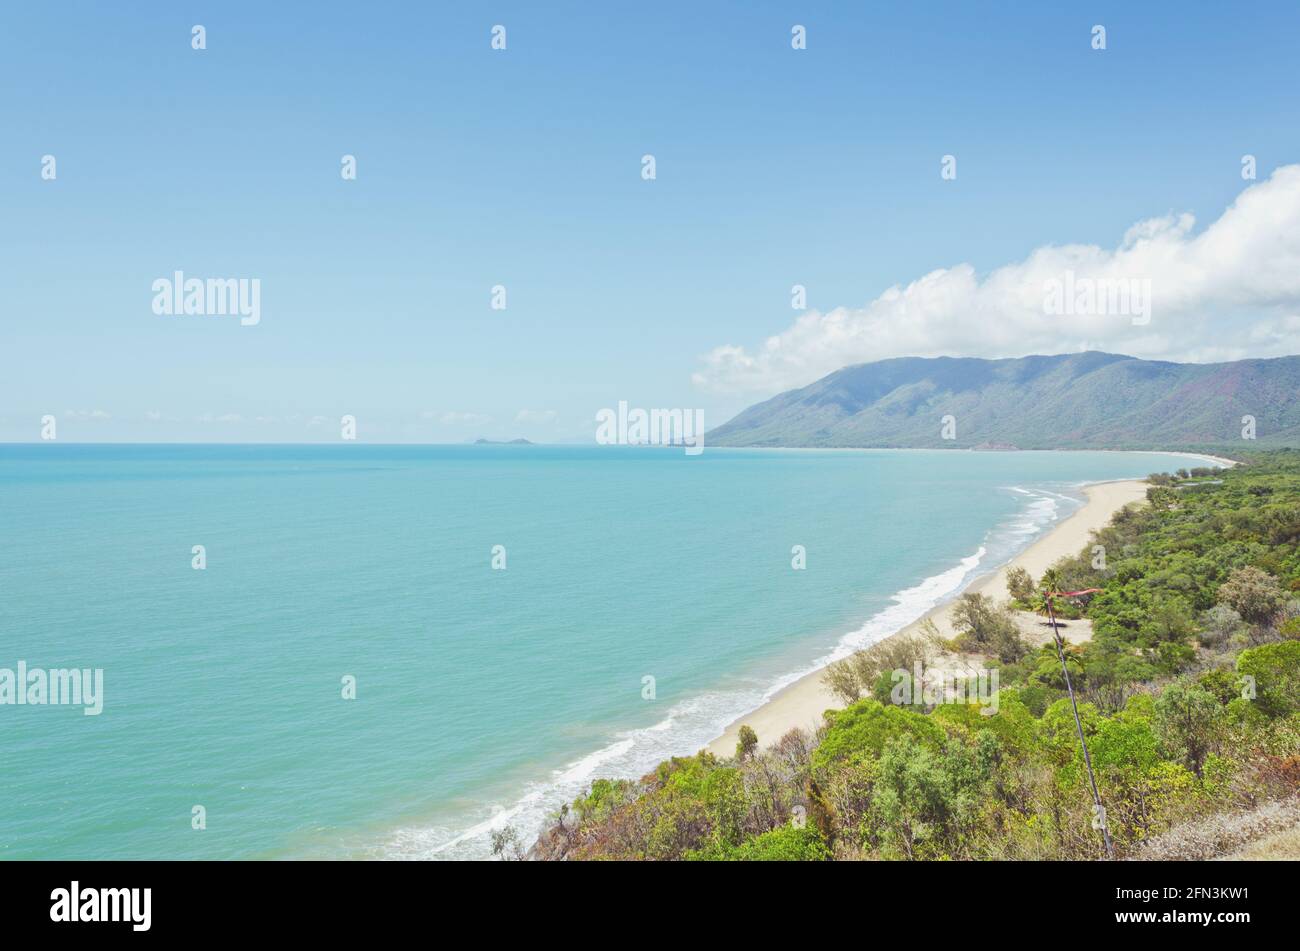 The rainforest meets the ocean in tropical North Queensland. Stock Photo